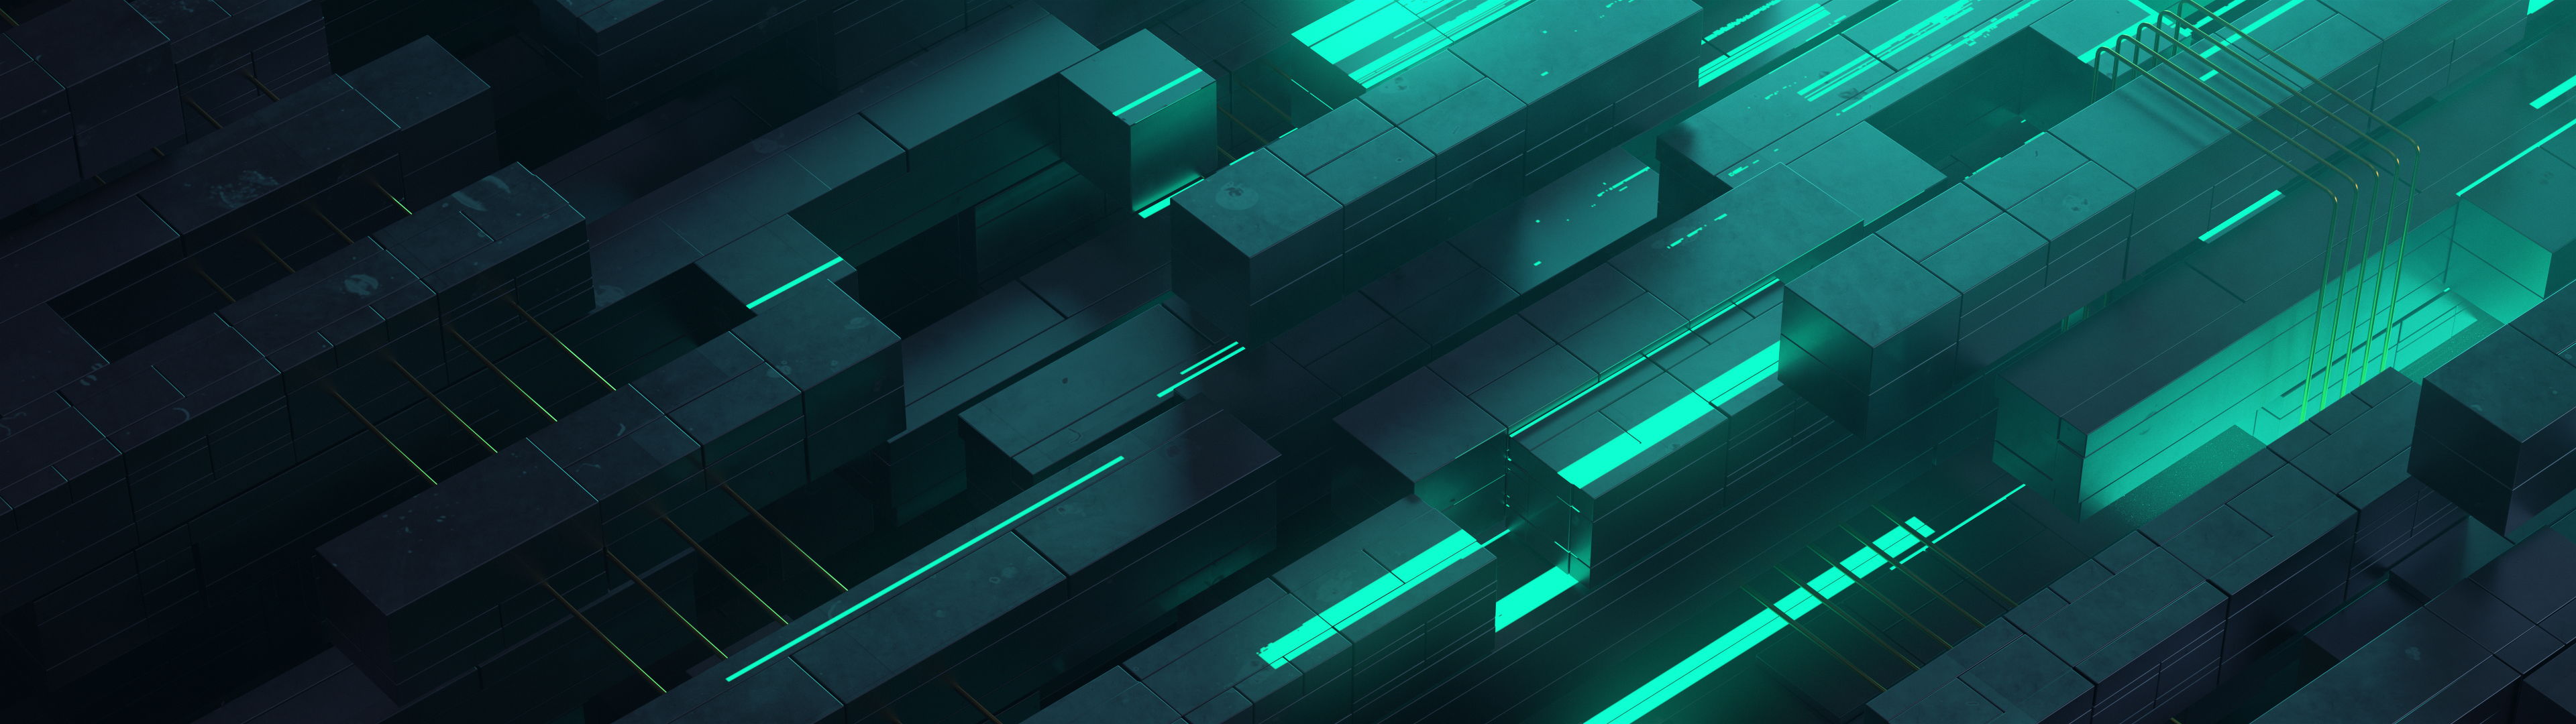 3D 3D Abstract Abstract Neon Glow Teal Technology Turquise 3840x1080